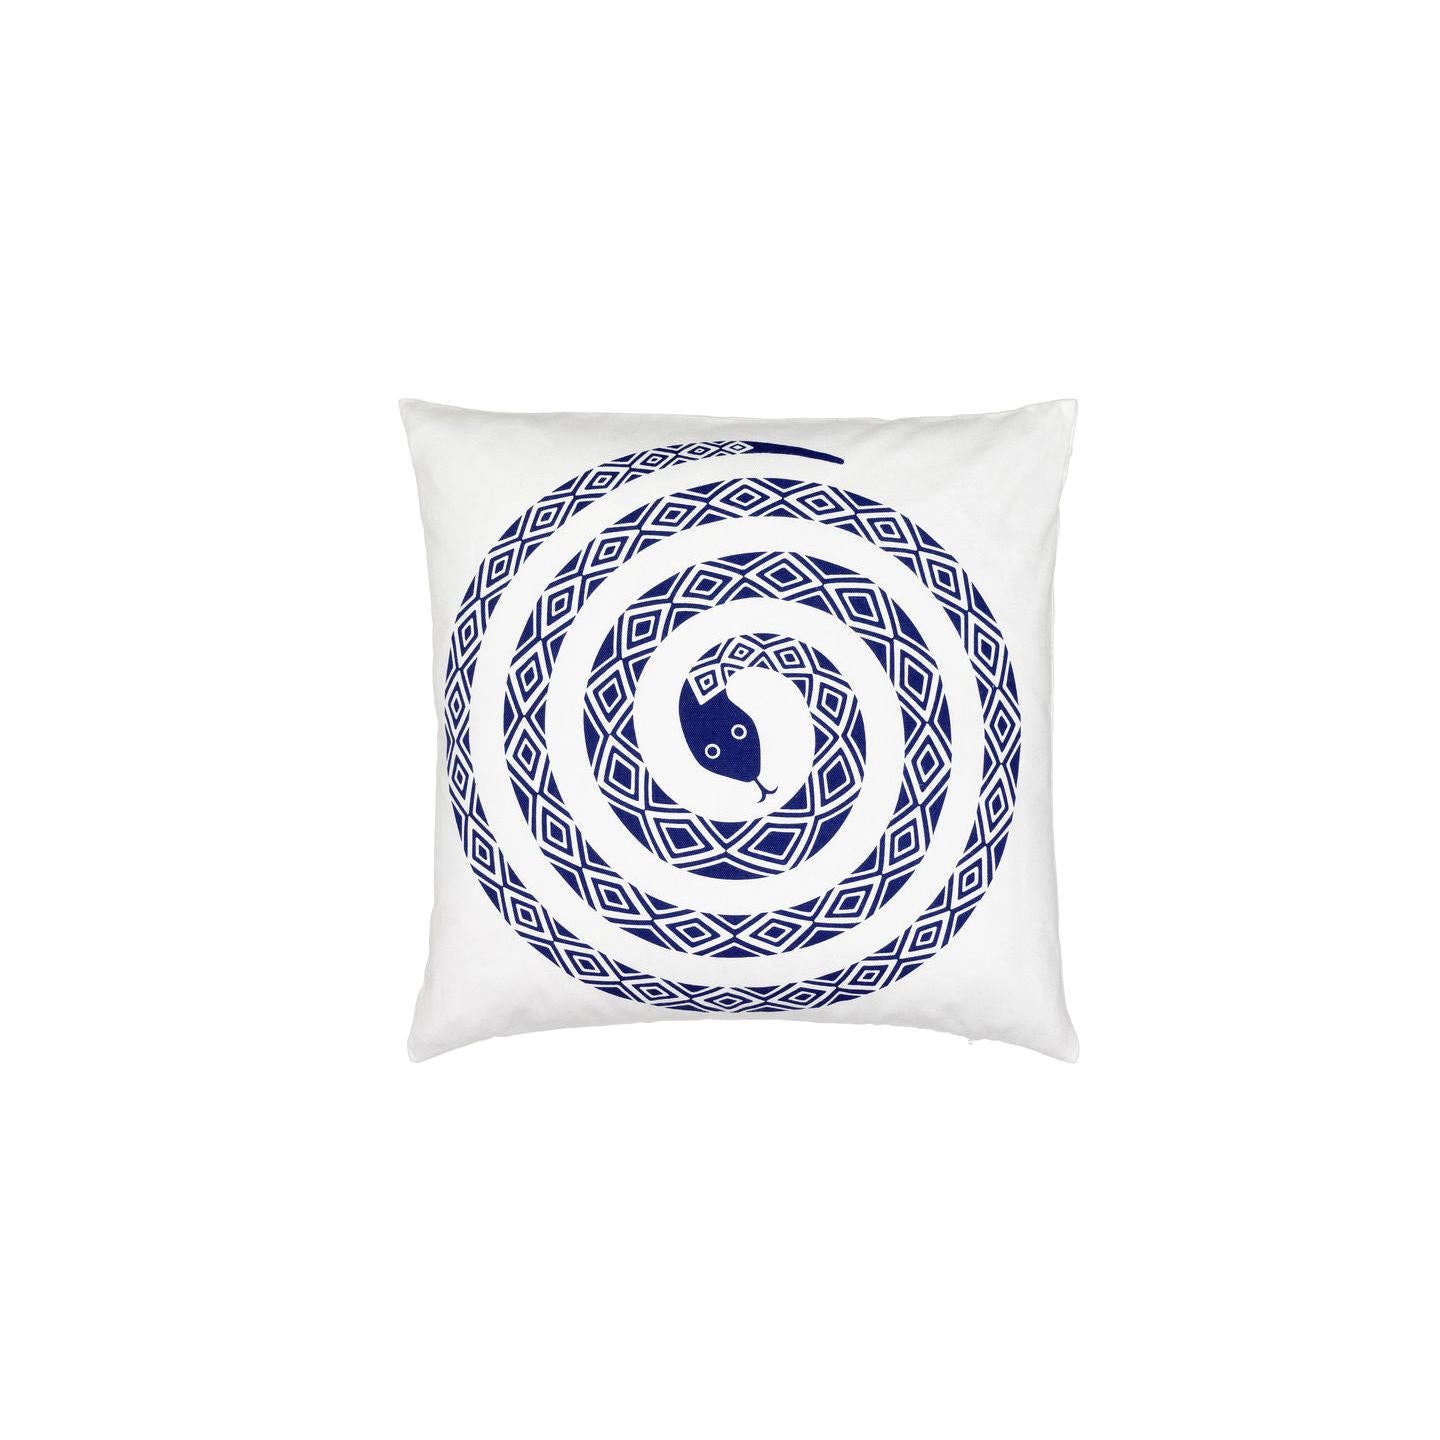 Vitra Graphic Pillow with Snake by Alexander Girard For Sale